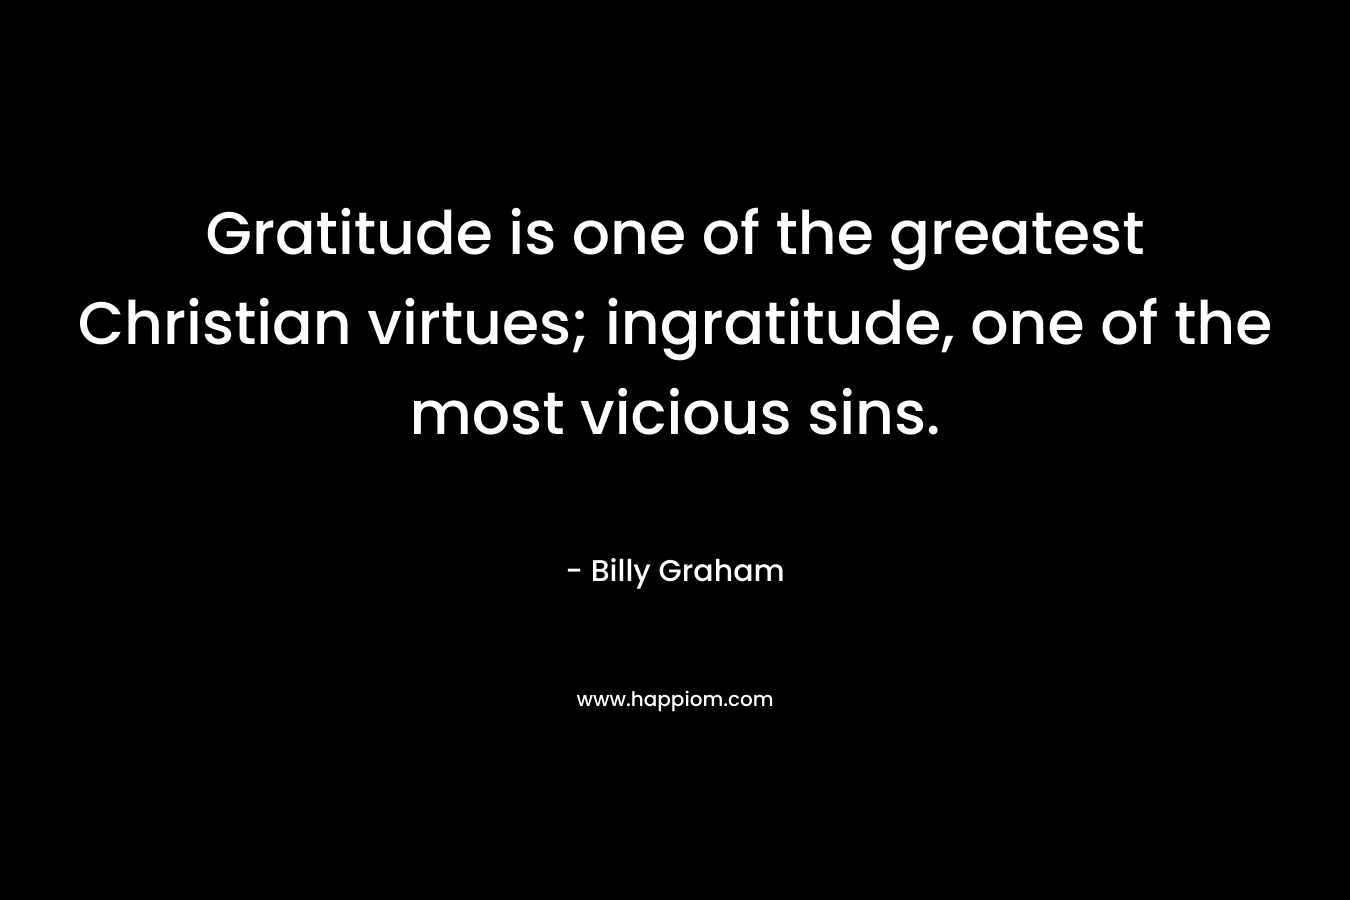 Gratitude is one of the greatest Christian virtues; ingratitude, one of the most vicious sins. – Billy Graham